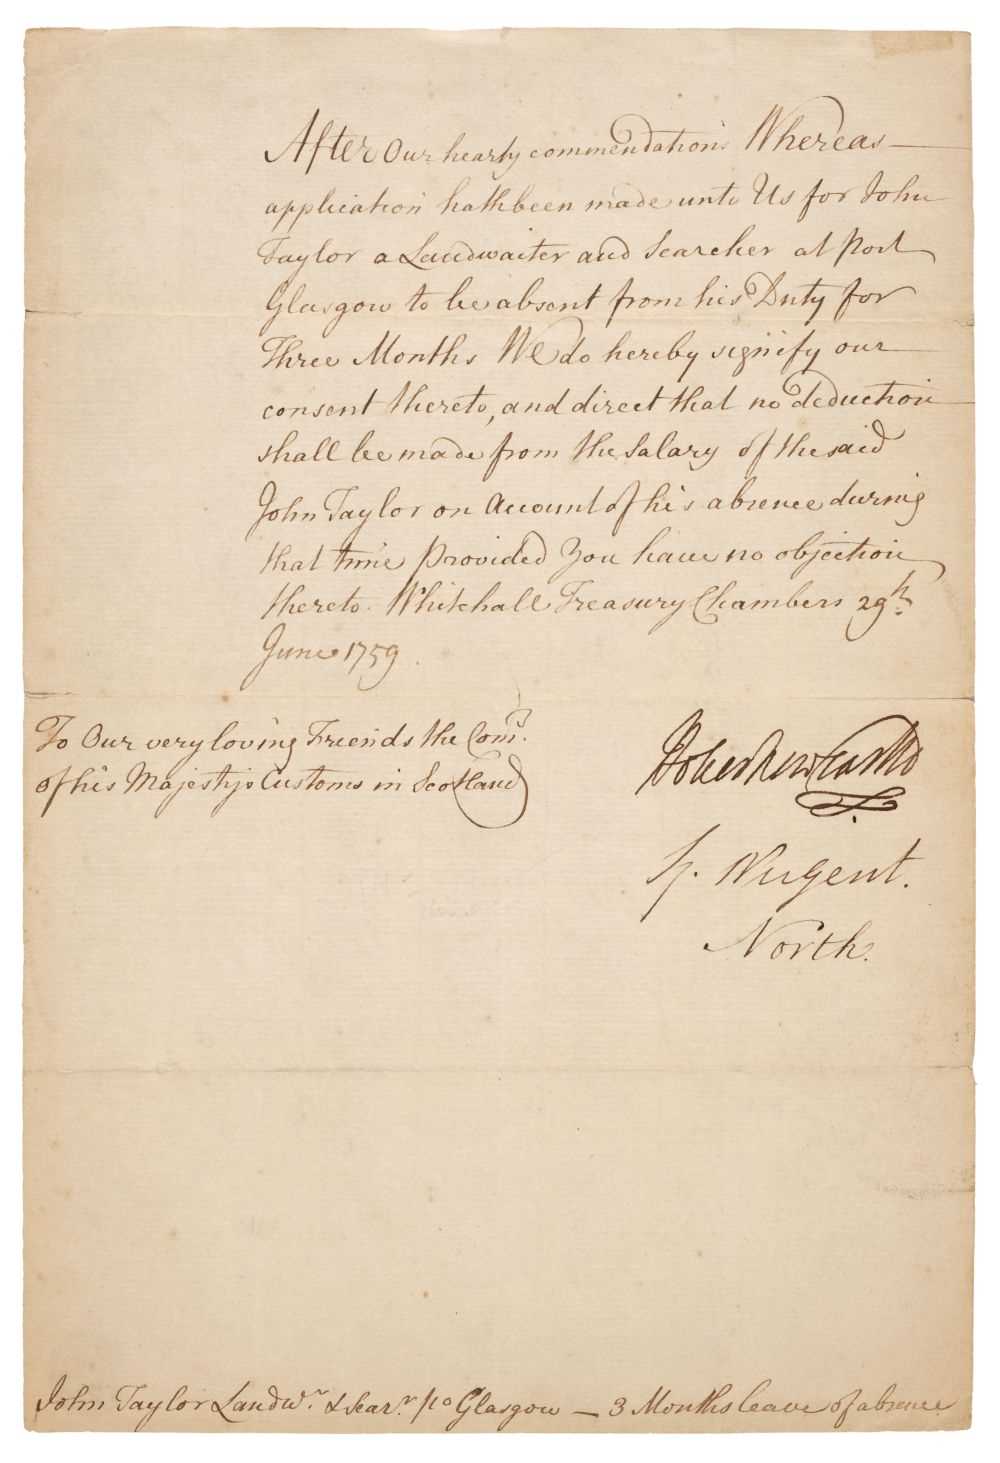 Lot 164 - Newcastle (Duke of, 1693-1768) AND North (Lord, 1732-1792), Document Signed,  29 June 1759